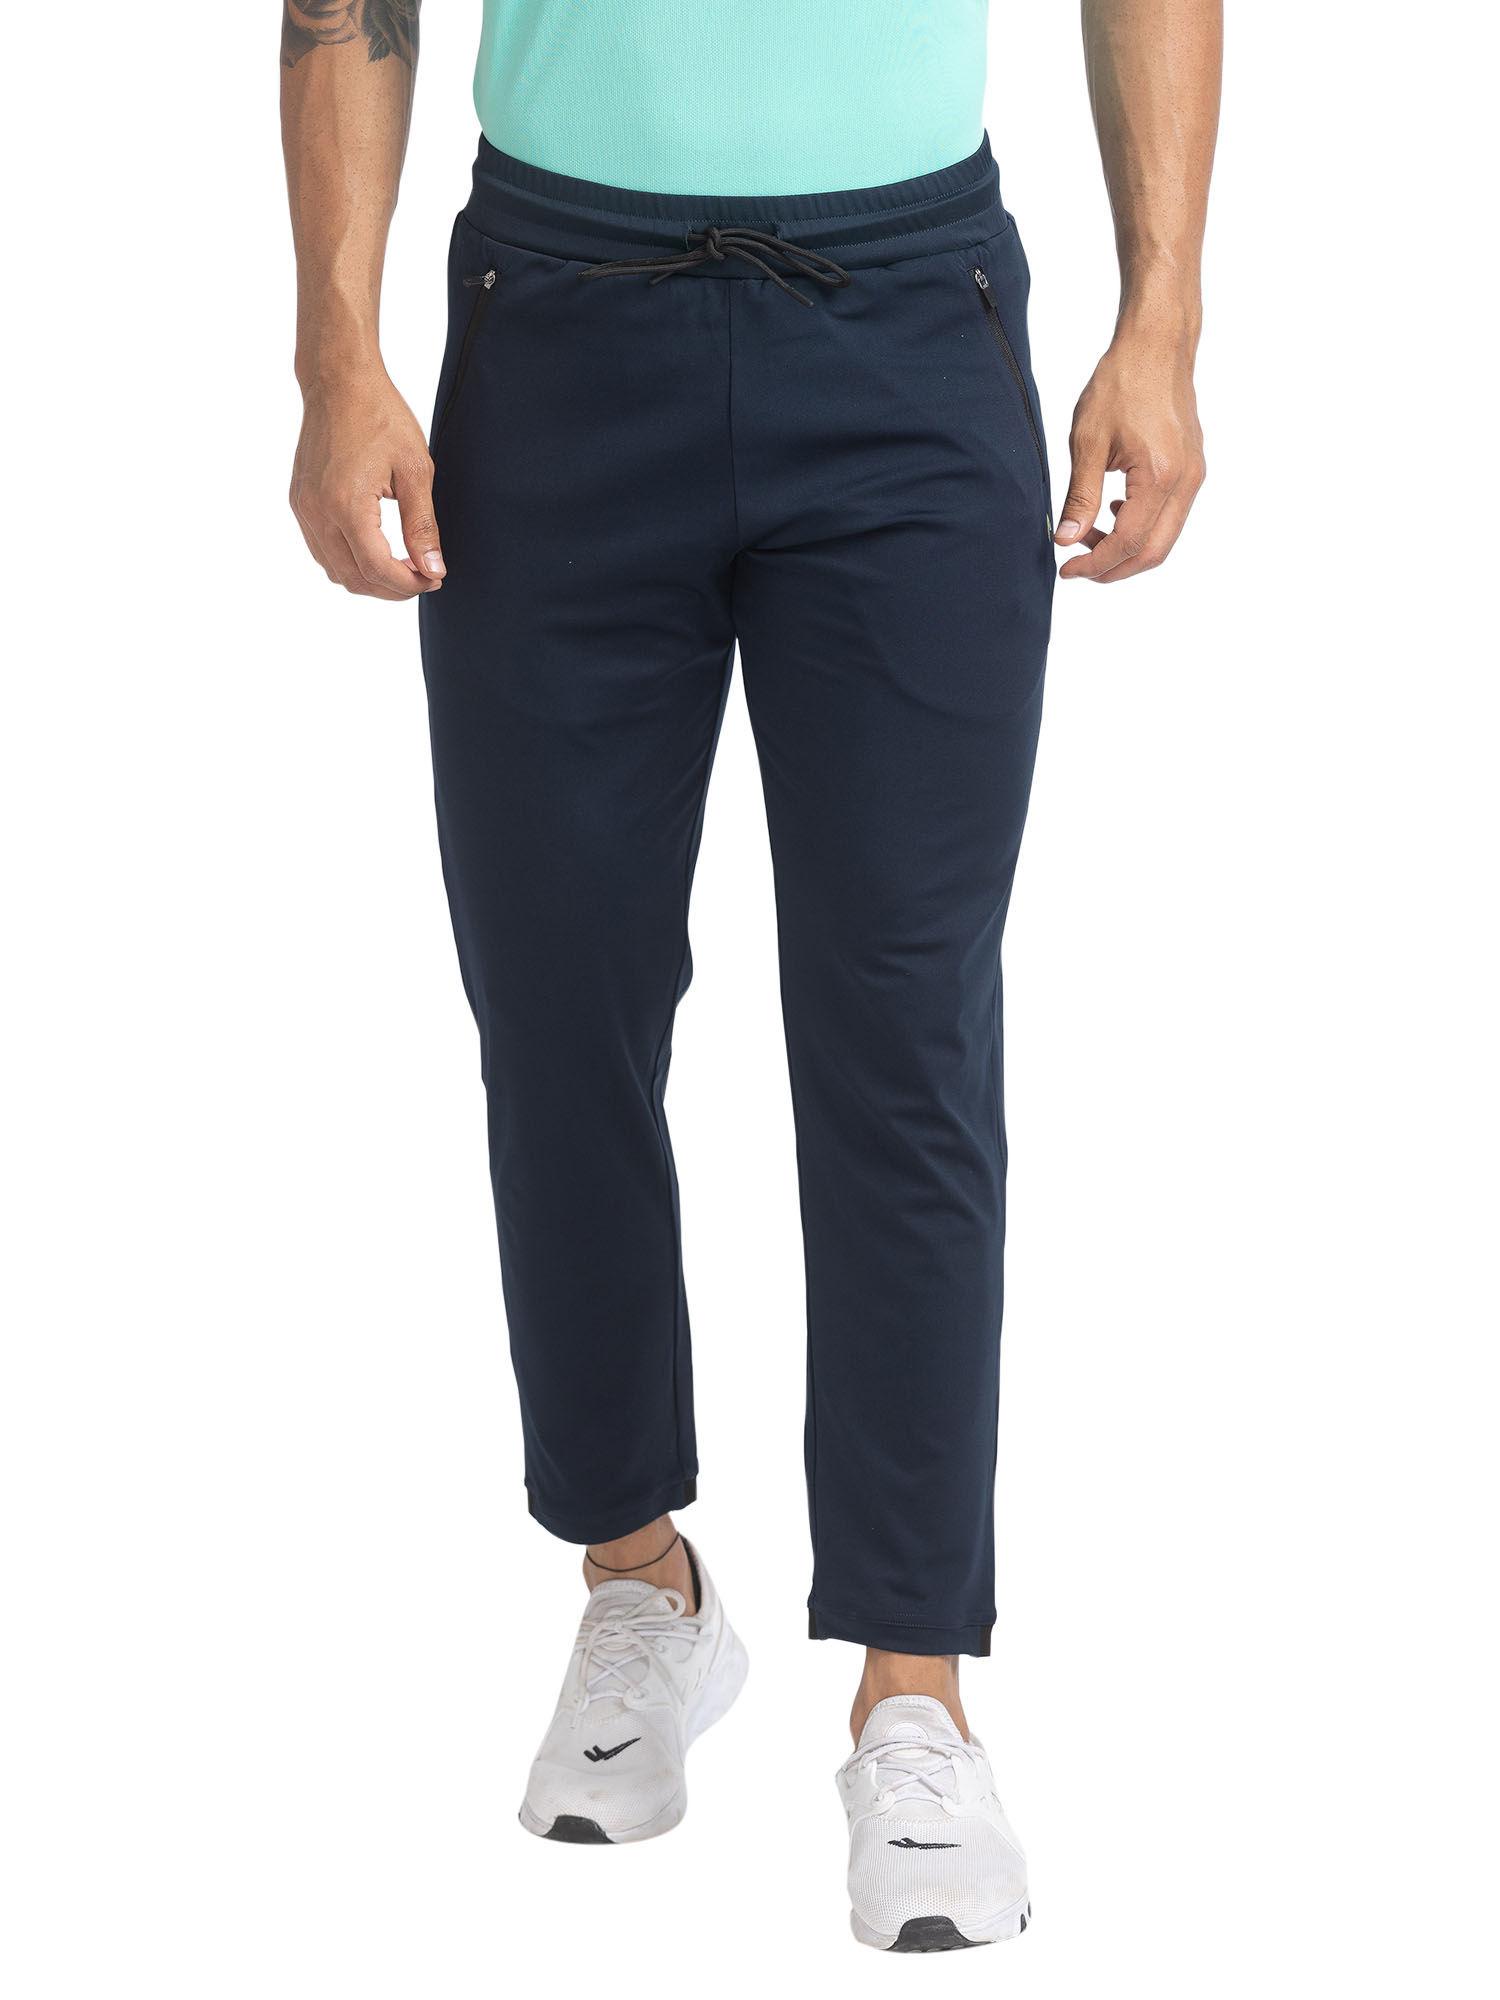 joggers fit solid dark blue track pant